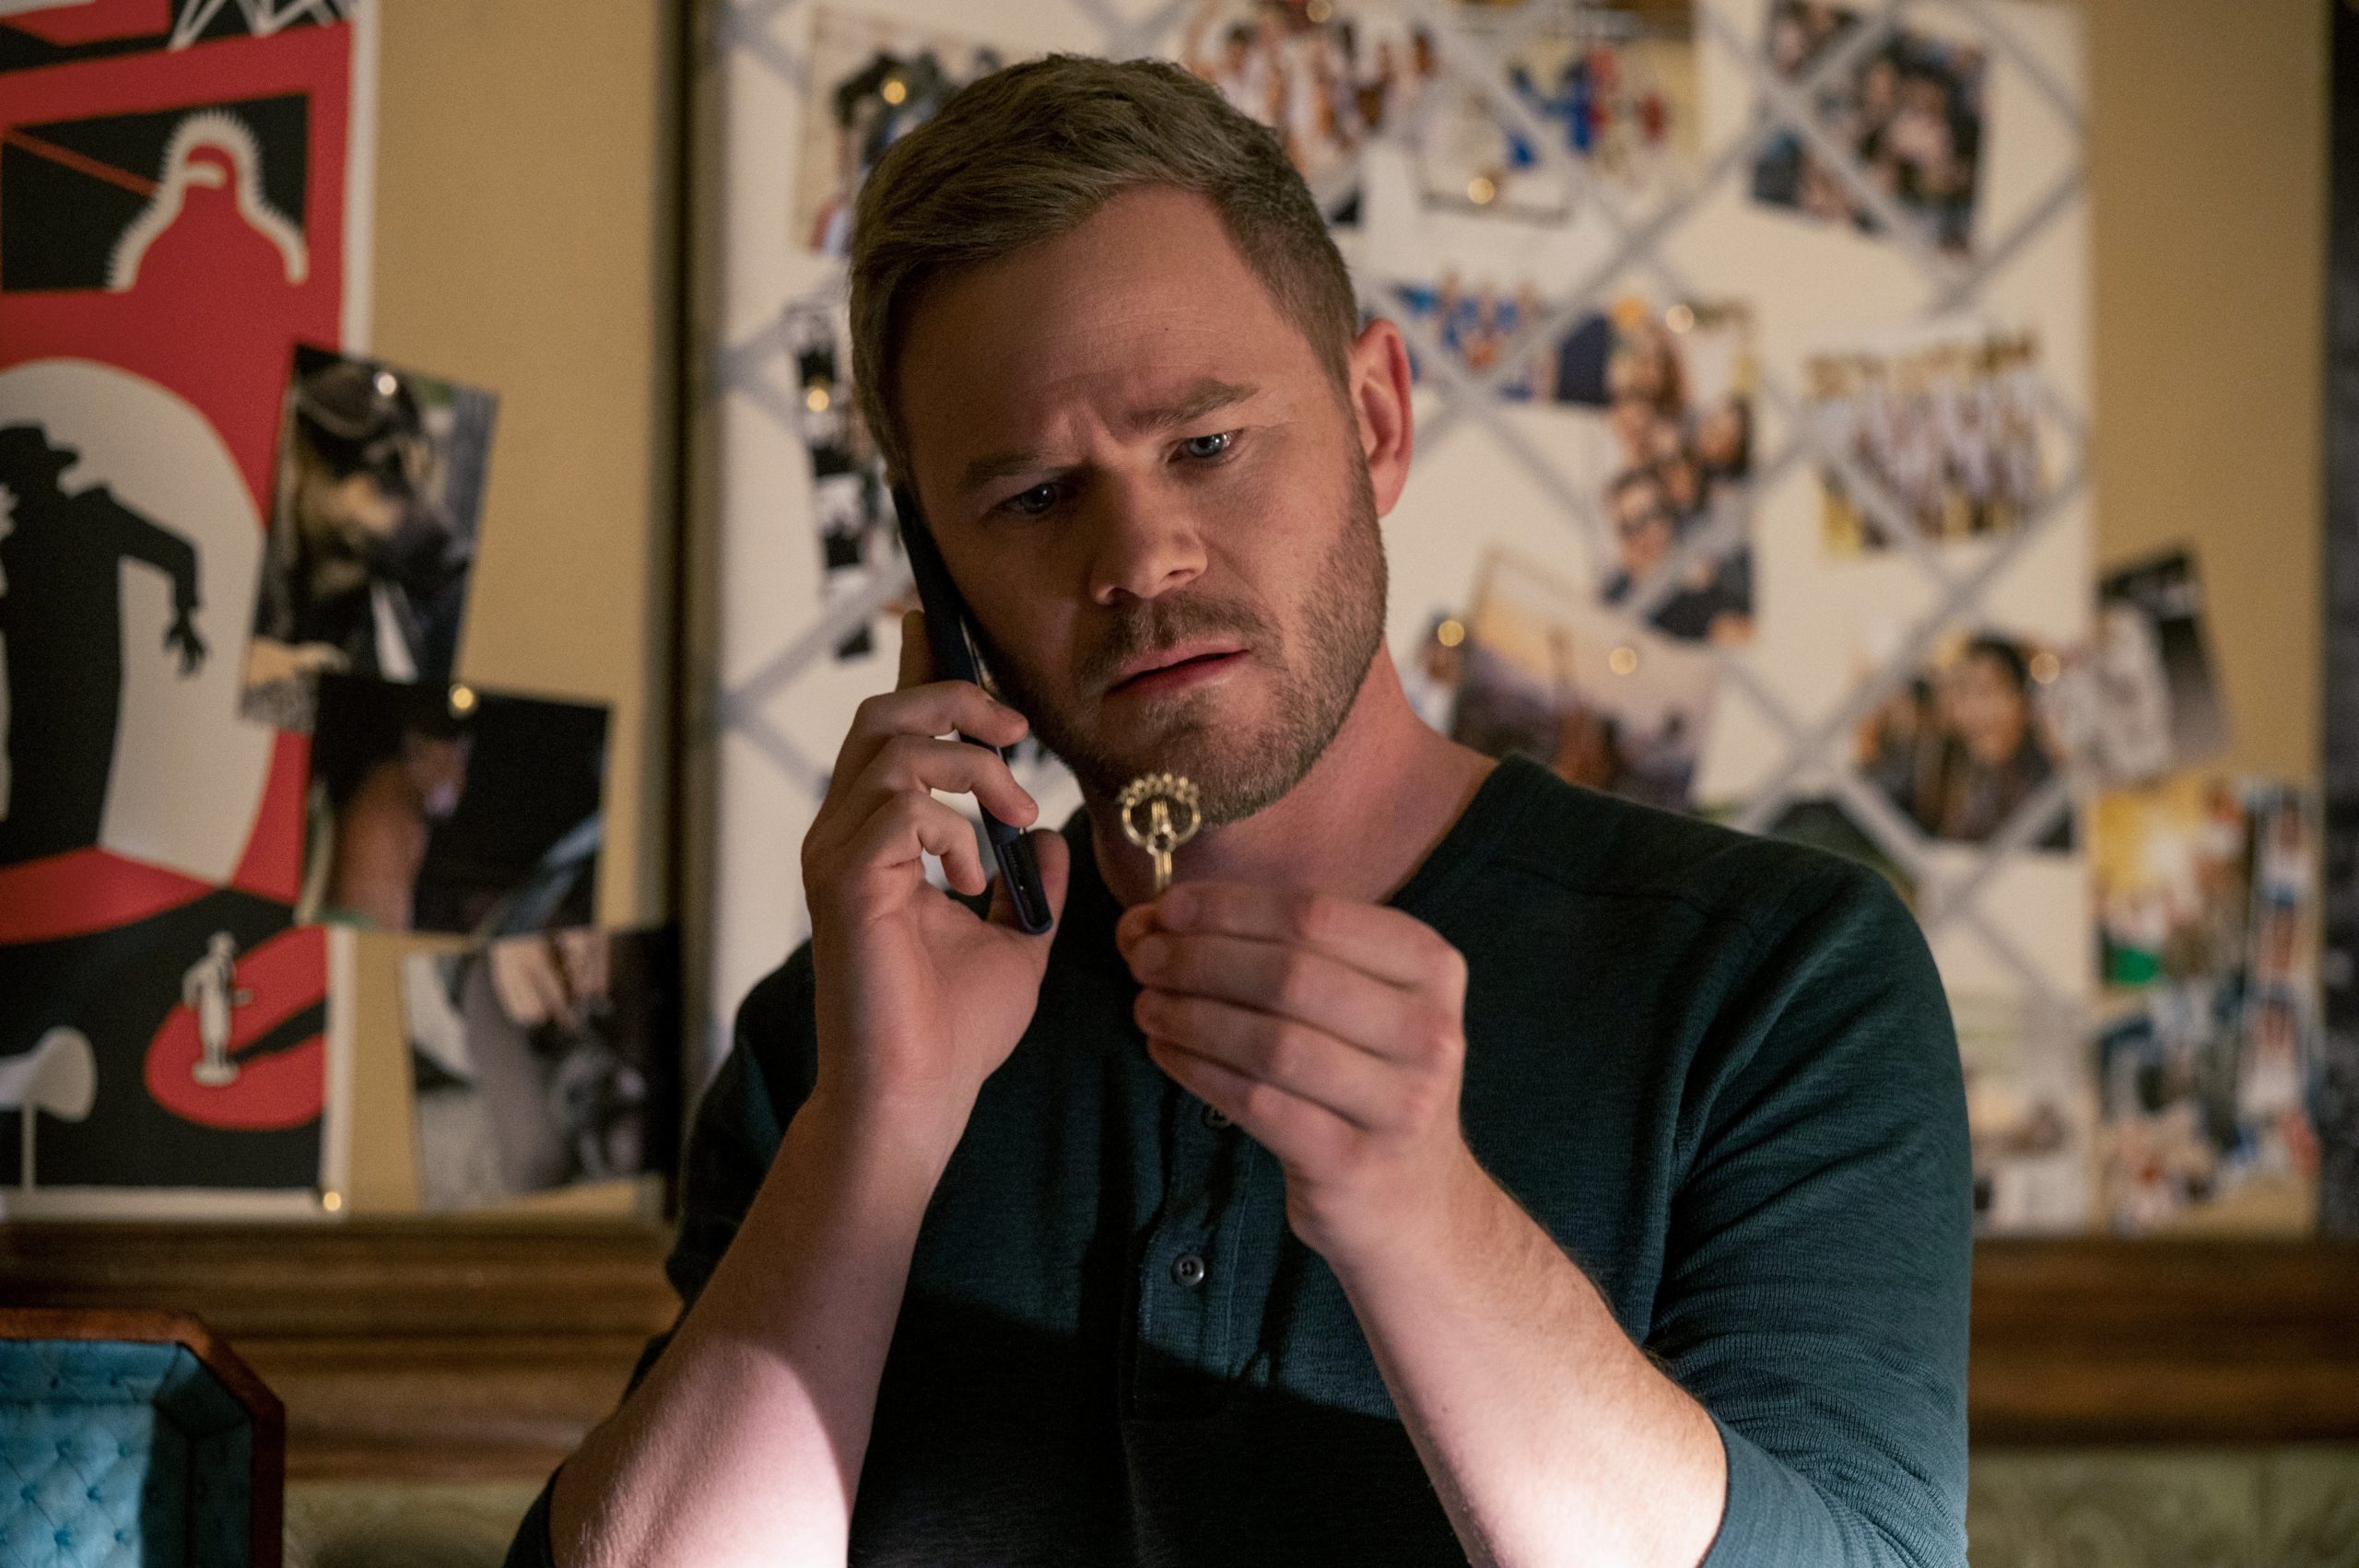 Will Duncan Locke (Aaron Ashmore) start remembering what all those keys are about? (Image: Amanda Matlovich/Netflix)